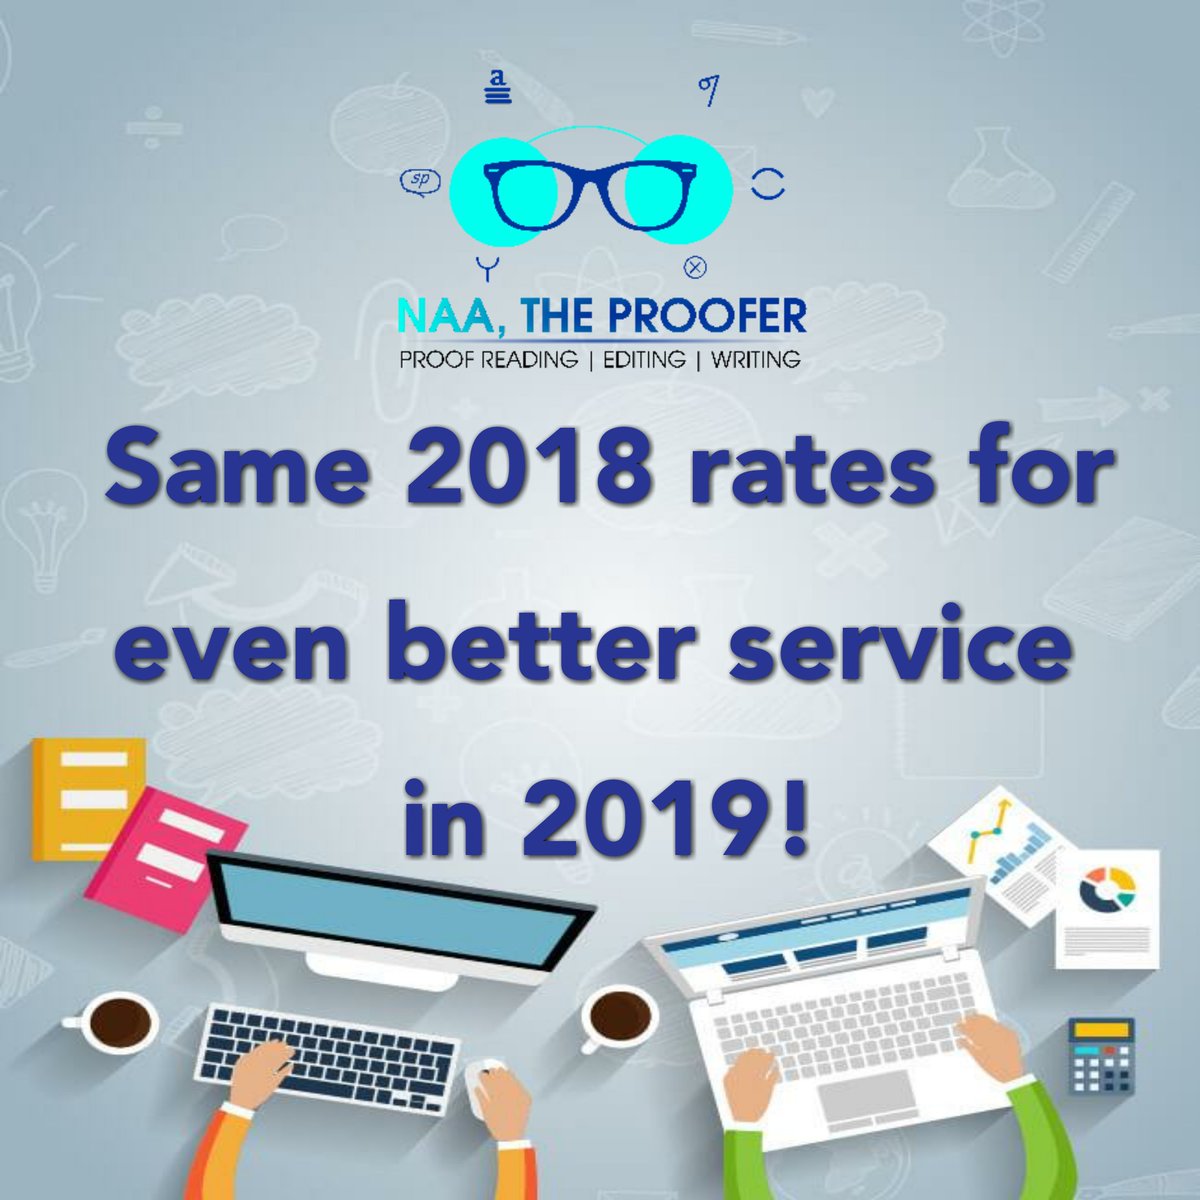 Throughout 2019!

Get your scripts written, proofread, and copyedited at convenient rates!

#NaaTheProofer #Proofreading #Editing #writingtips #AmEditing #amwriting #copyediting  #poetrycommunity #selfpublishing
#BusinessProposals #Discount #Rates #BusinessPlans #Hello2019